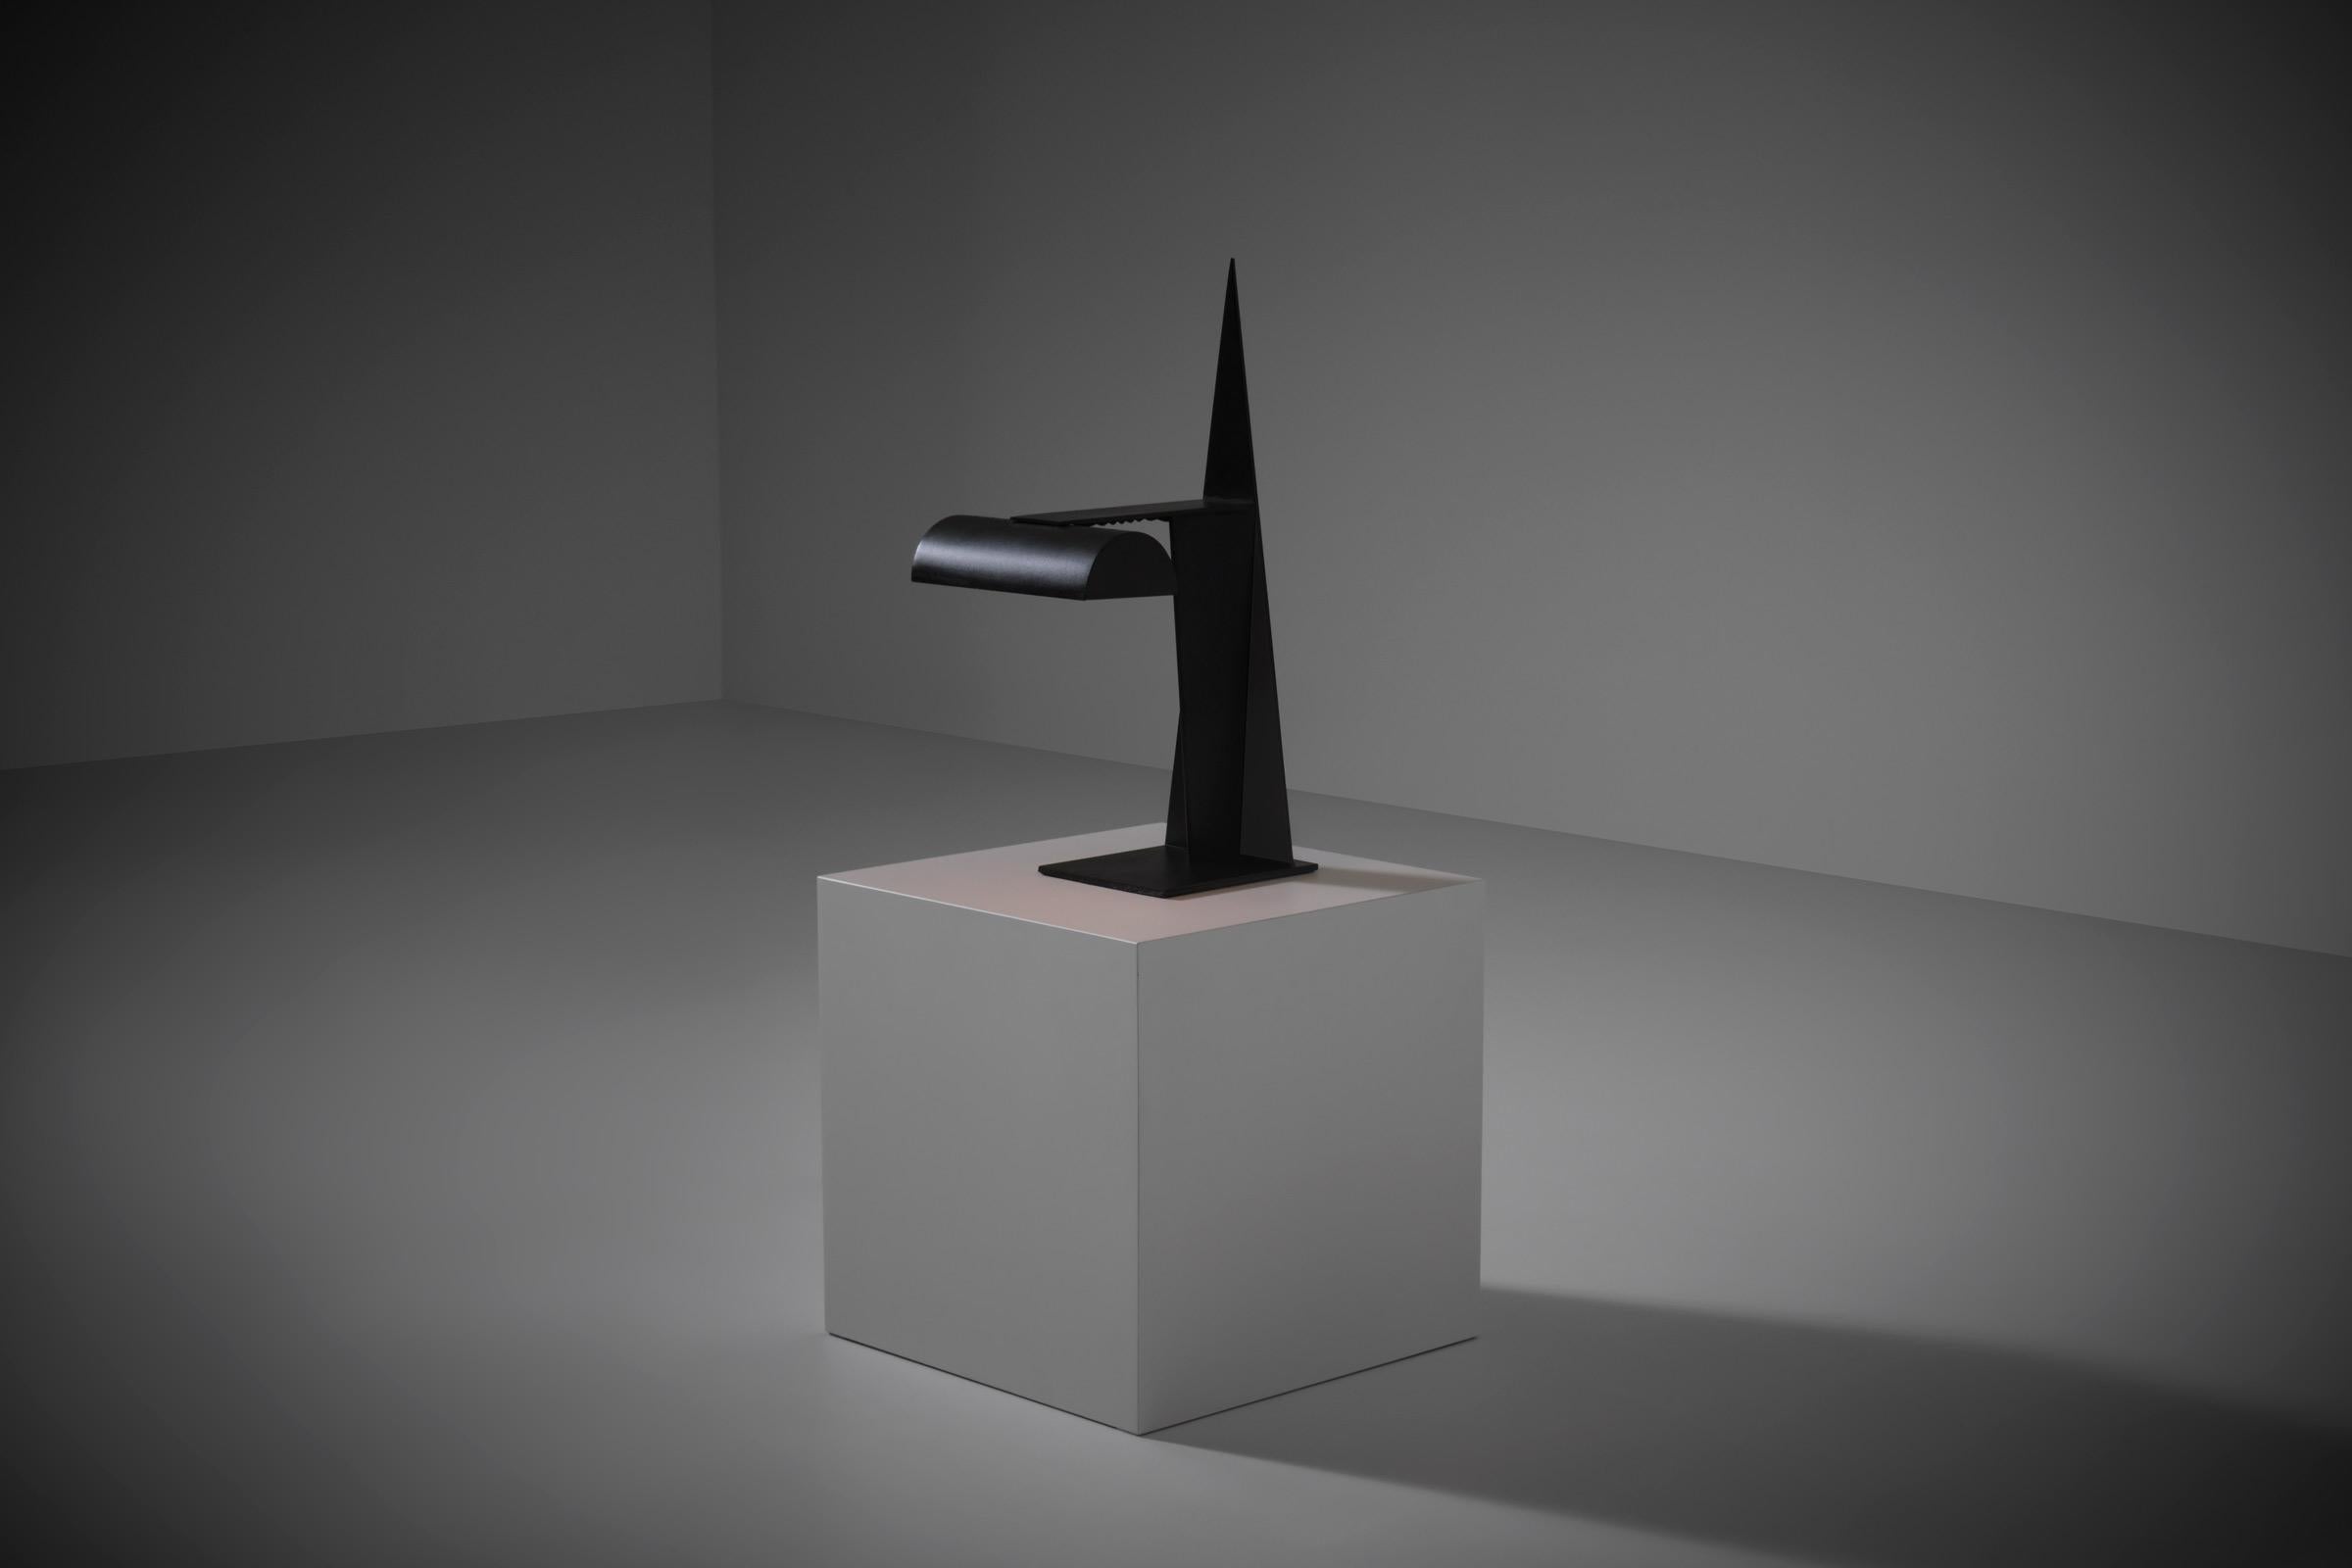 Sculptural table lamp designed by Alexander Rodchenko in 1920s. The most known version is model 576 by Gino Sarfatti for Arteluce, this is a small French atelier production from Espace Lumière edition, 1990s. Intriguing constructivist design